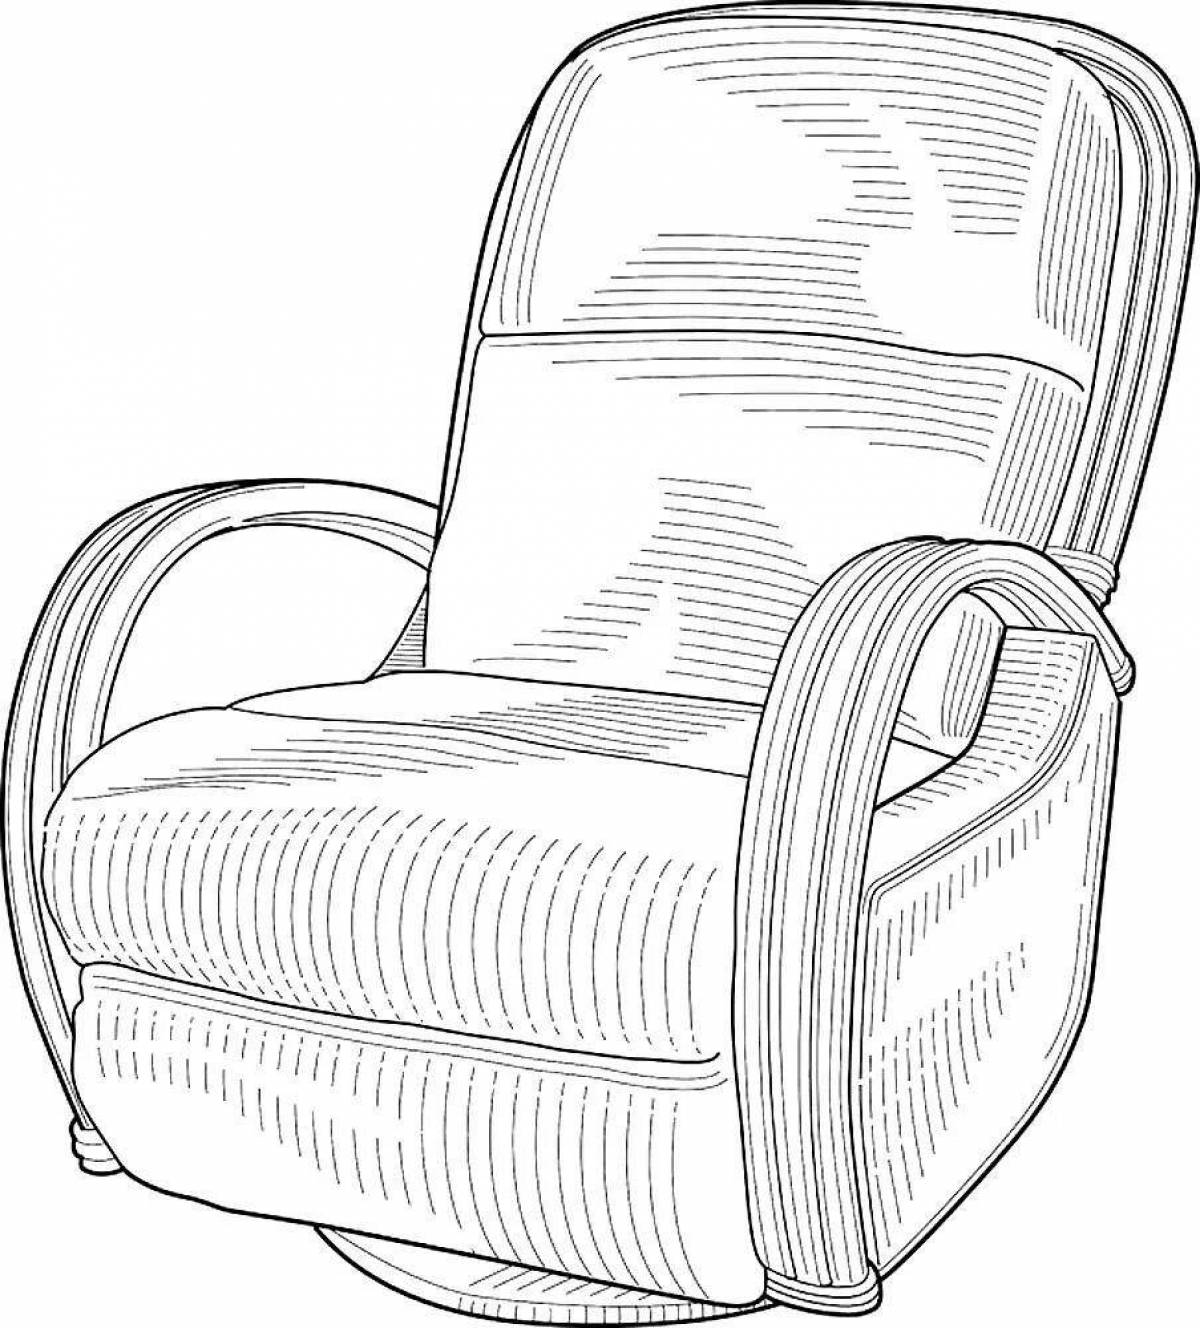 Intriguing sofa chair coloring page